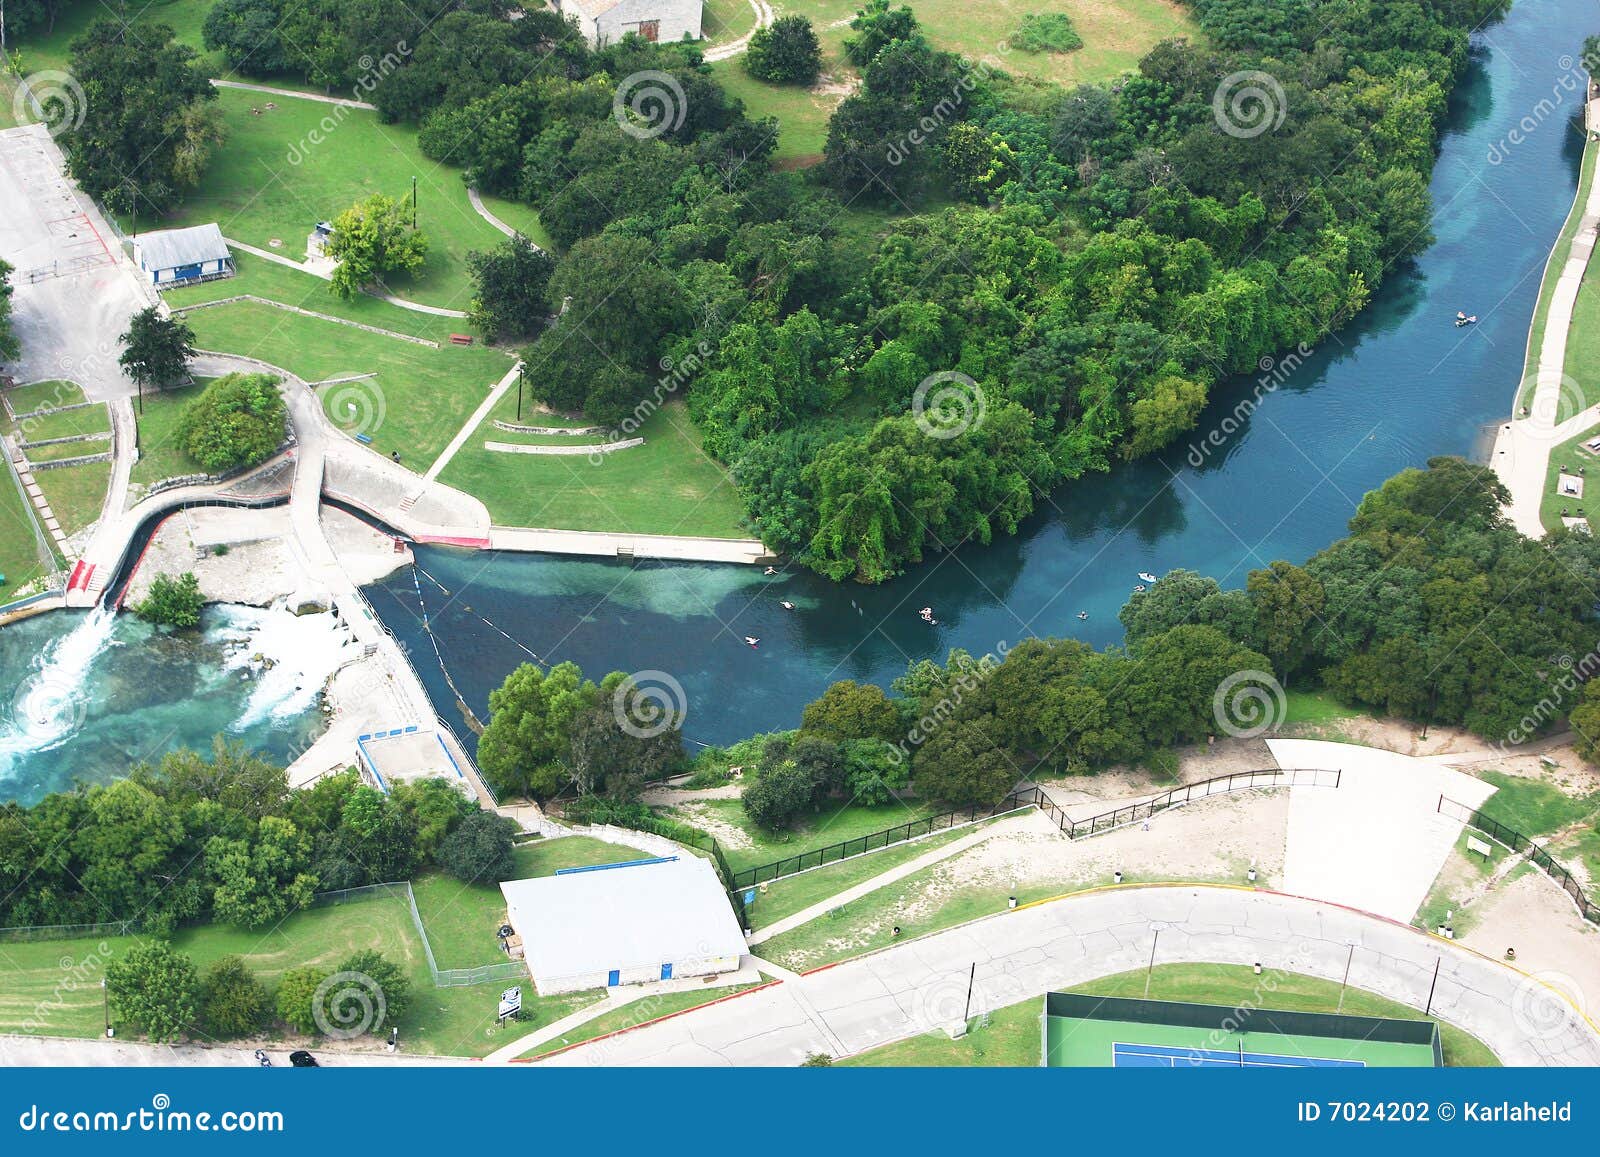 aerial shot of comal river in texas